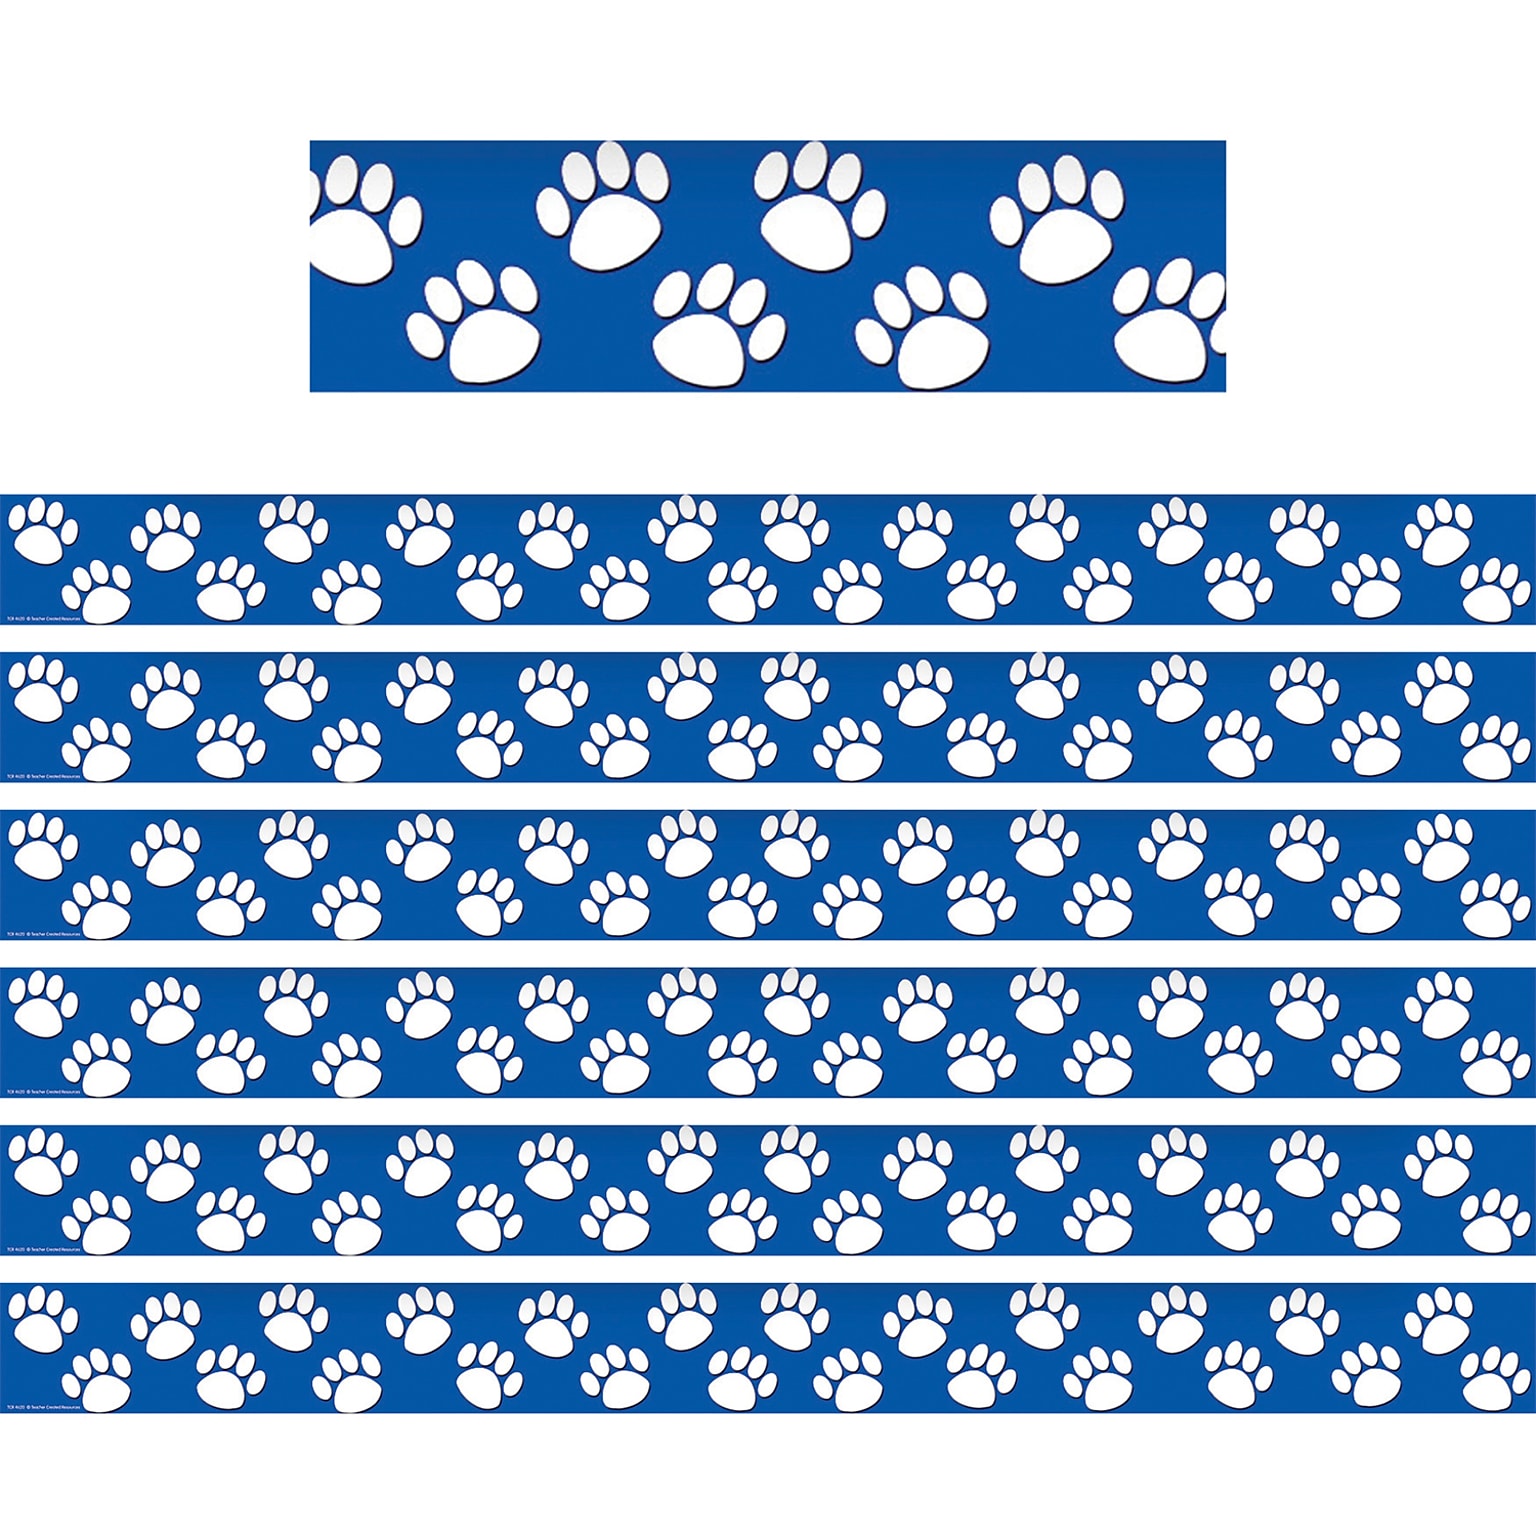 Teacher Created Resources Blue with White Paw Prints Border Trim, 35 Feet Per Pack, 6 Packs (TCR4620-6)